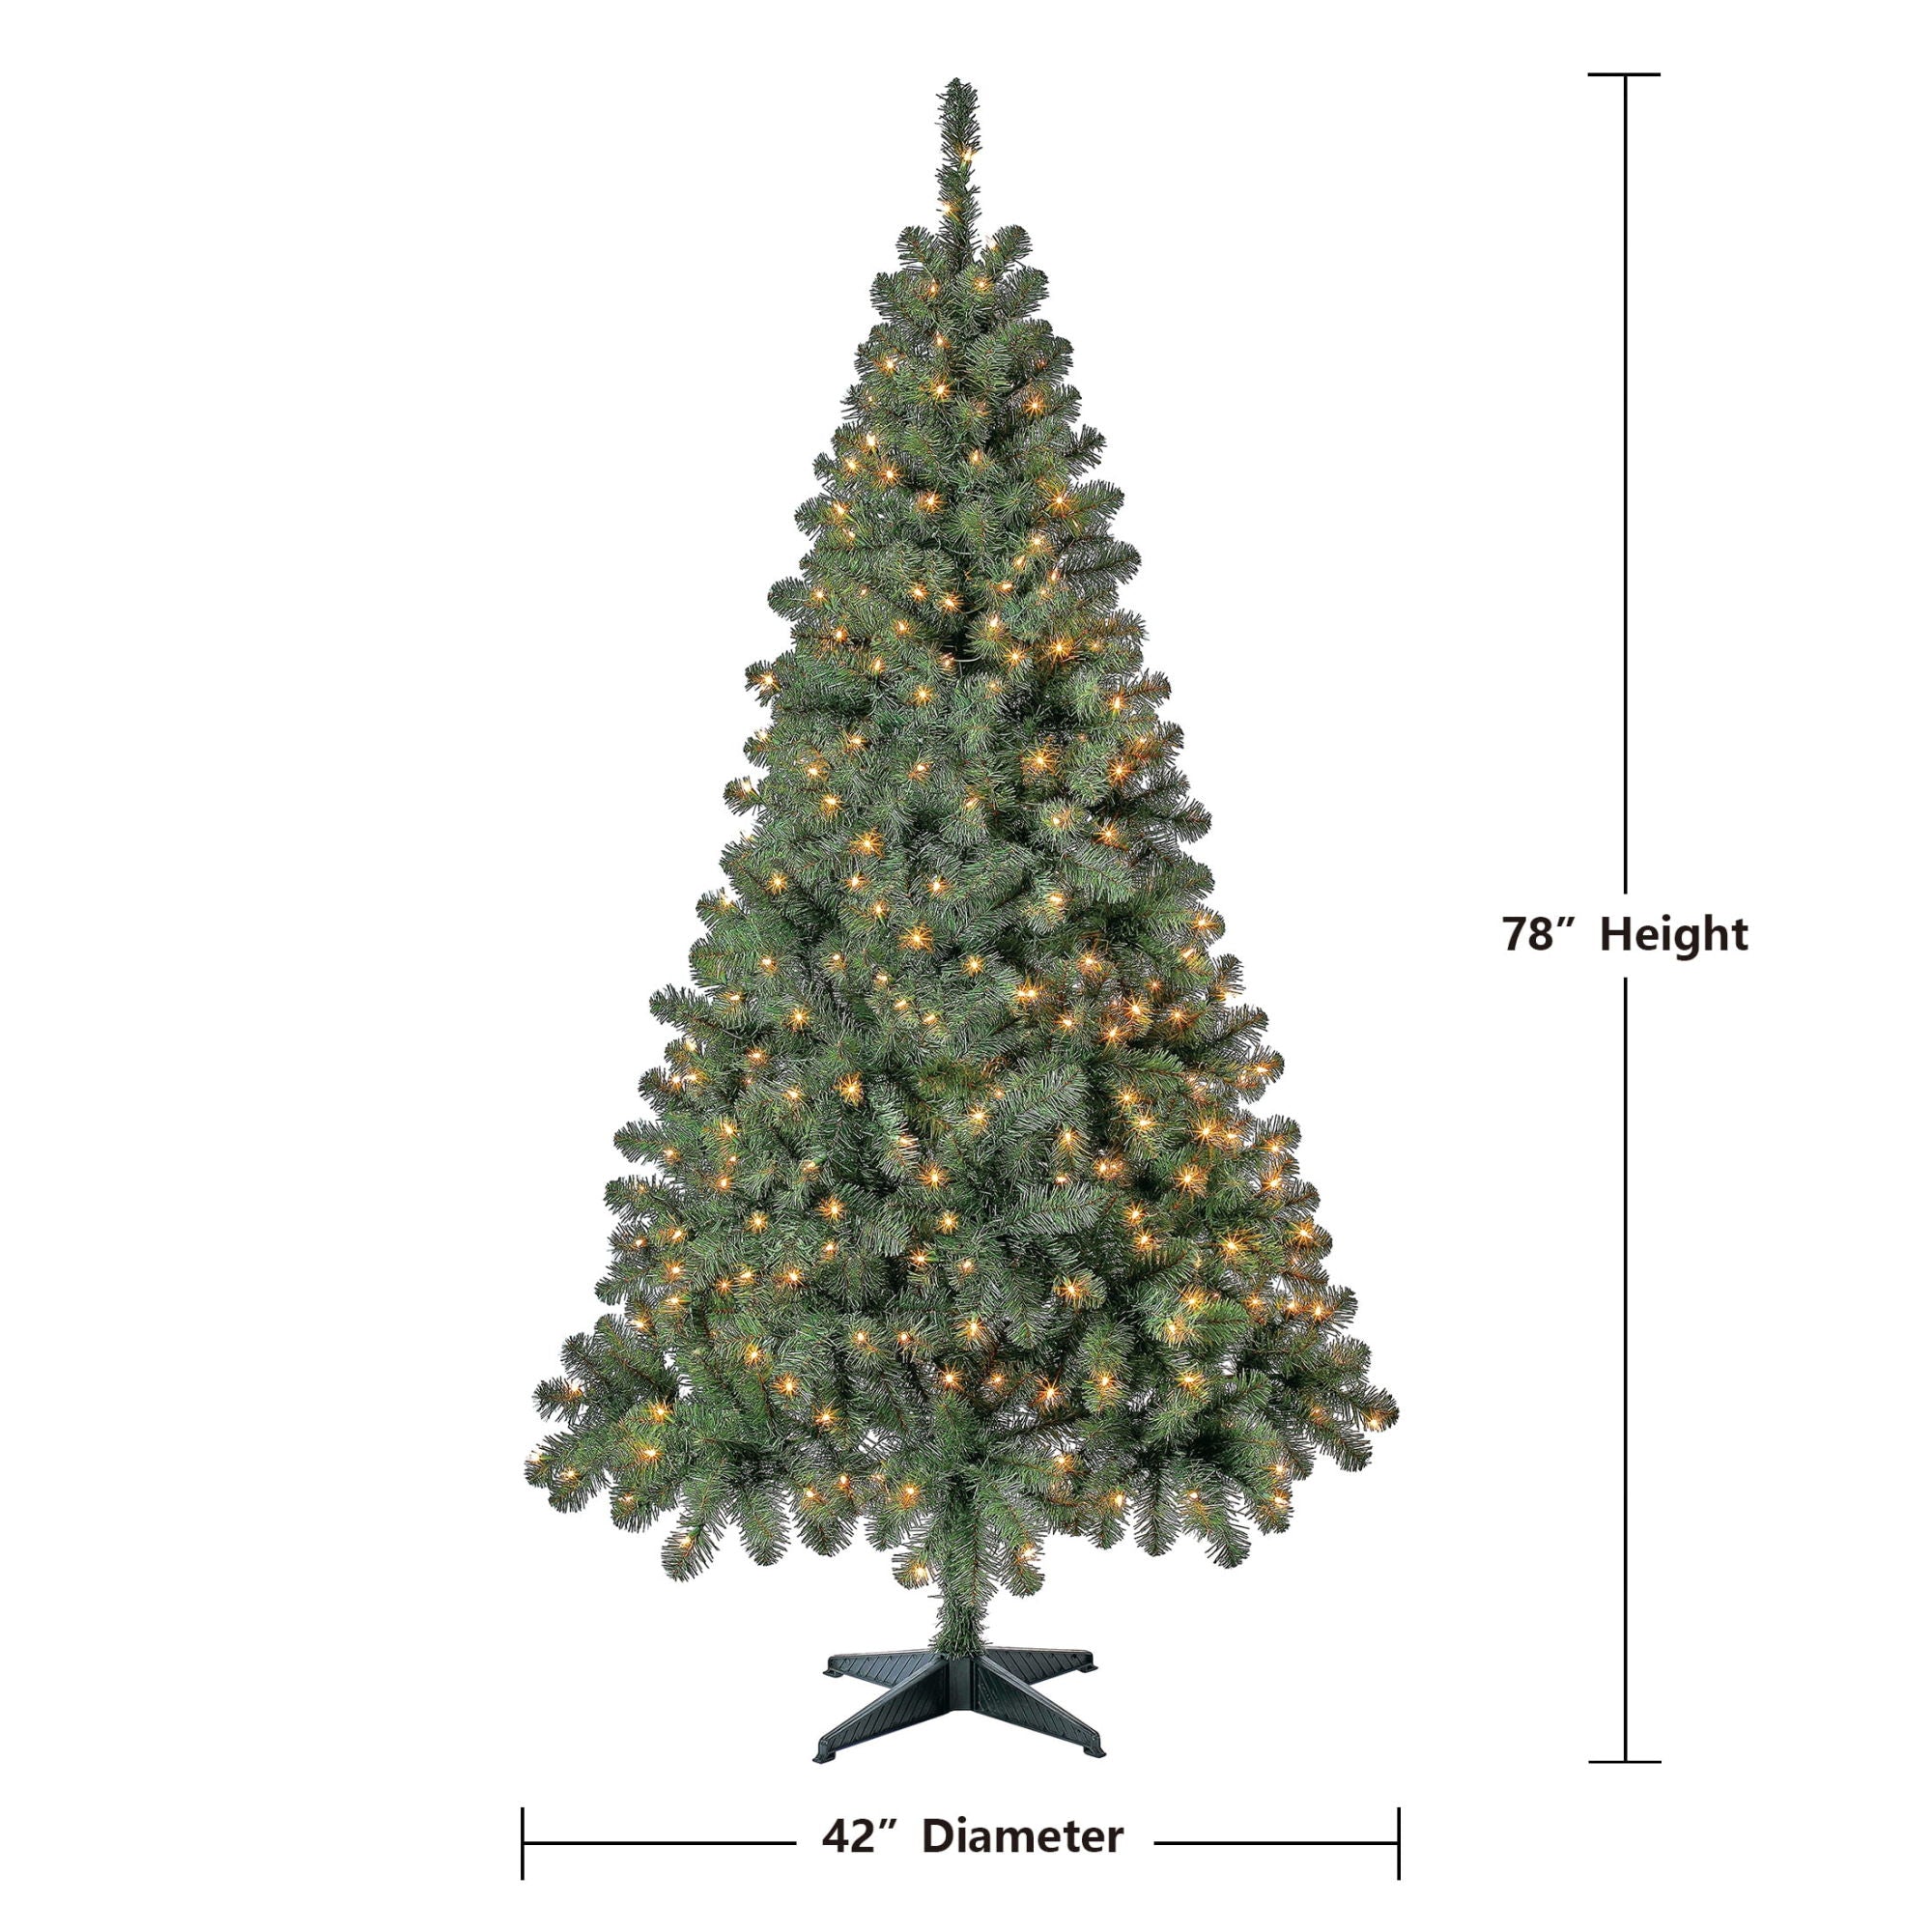 Madison Pine 6.5 ft Pre-Lit Black Artificial Christmas Tree with Clear Incandescent Lights